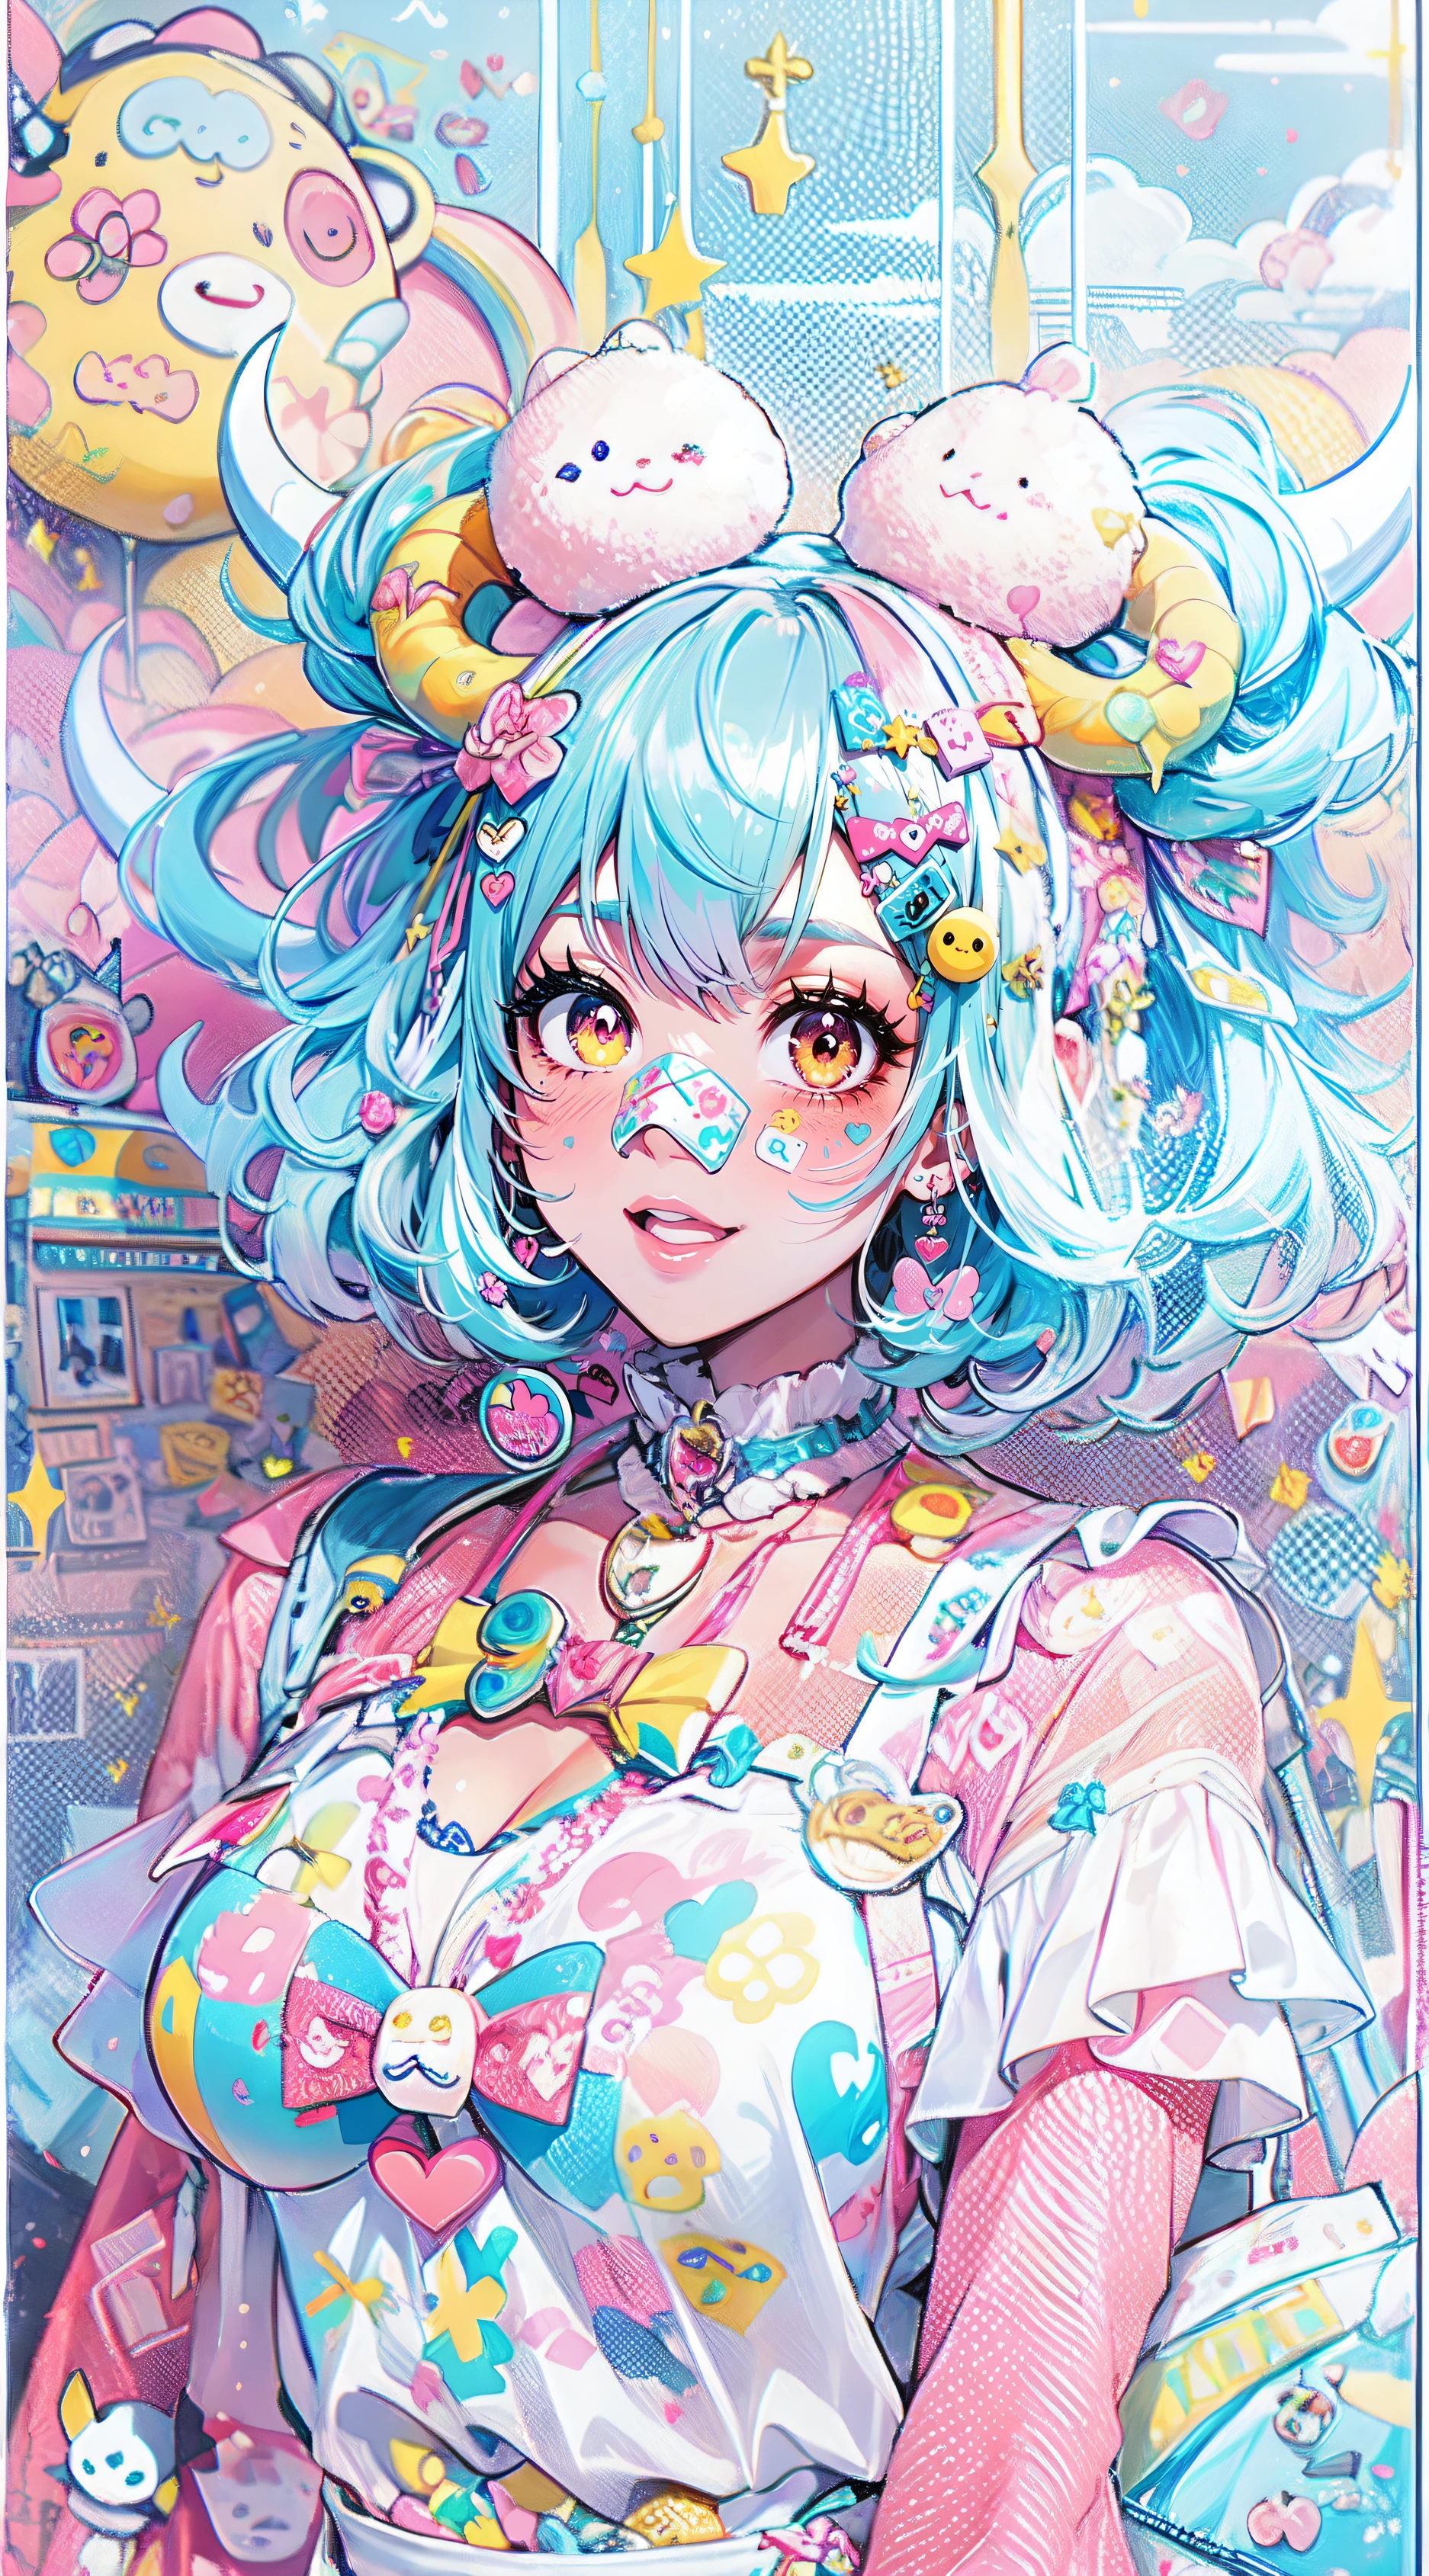 "kawaii, cute, adorable woman with pink, yellow, and baby blue color scheme. She is dressed in sky-themed clothes made out of clouds and sky motifs. Her outfit is fluffy and soft, with decora accessories like hairclips. She embodies the vibrant and trendy Harajuku fashion style." White hair, red eyes, horns, demon wings, big ,big ass, big lips, juicy lips, huge hair, smile